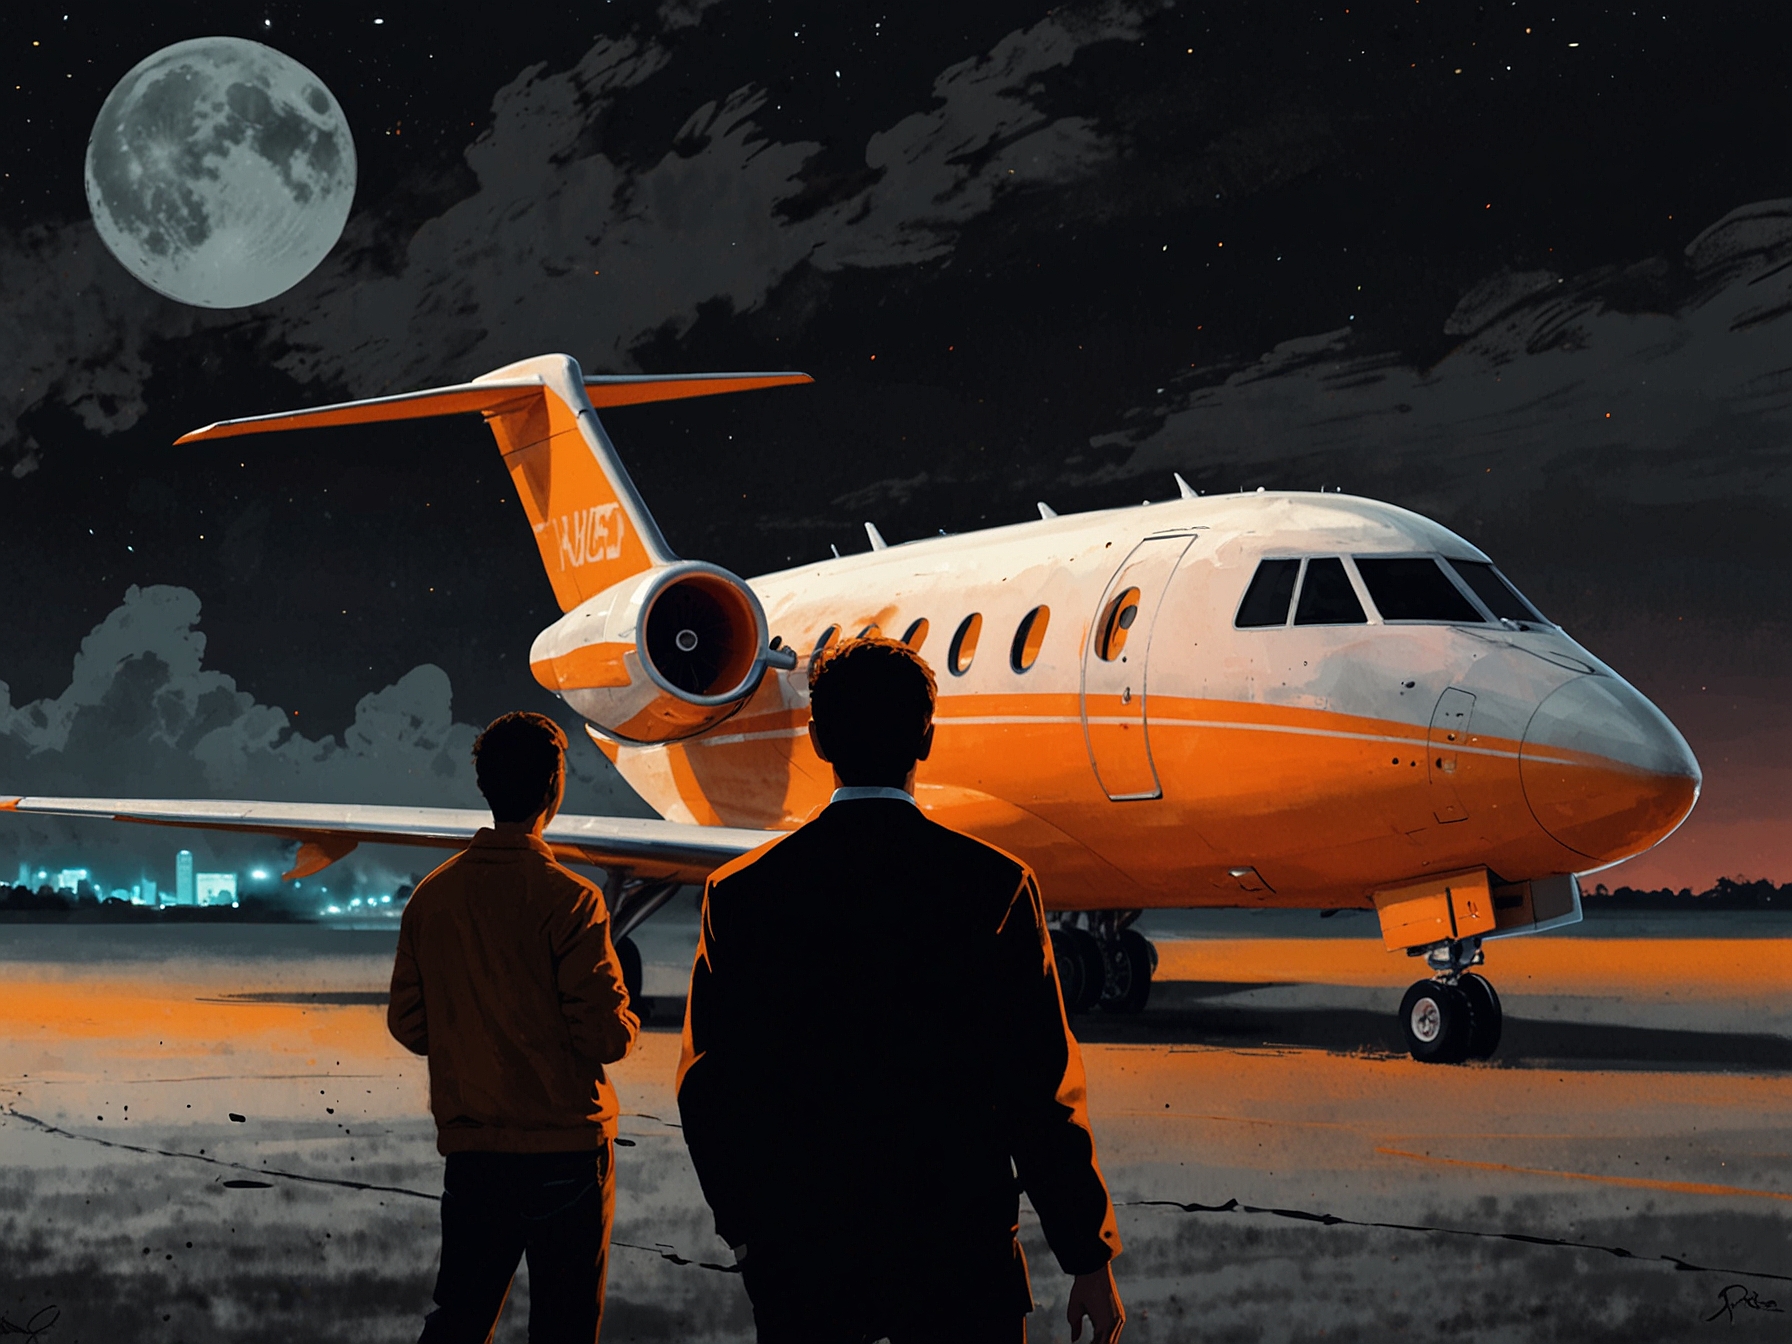 Two climate activists spray-paint a line of private jets with bright orange paint at night, showcasing their frustration towards the environmental impact of luxury air travel.